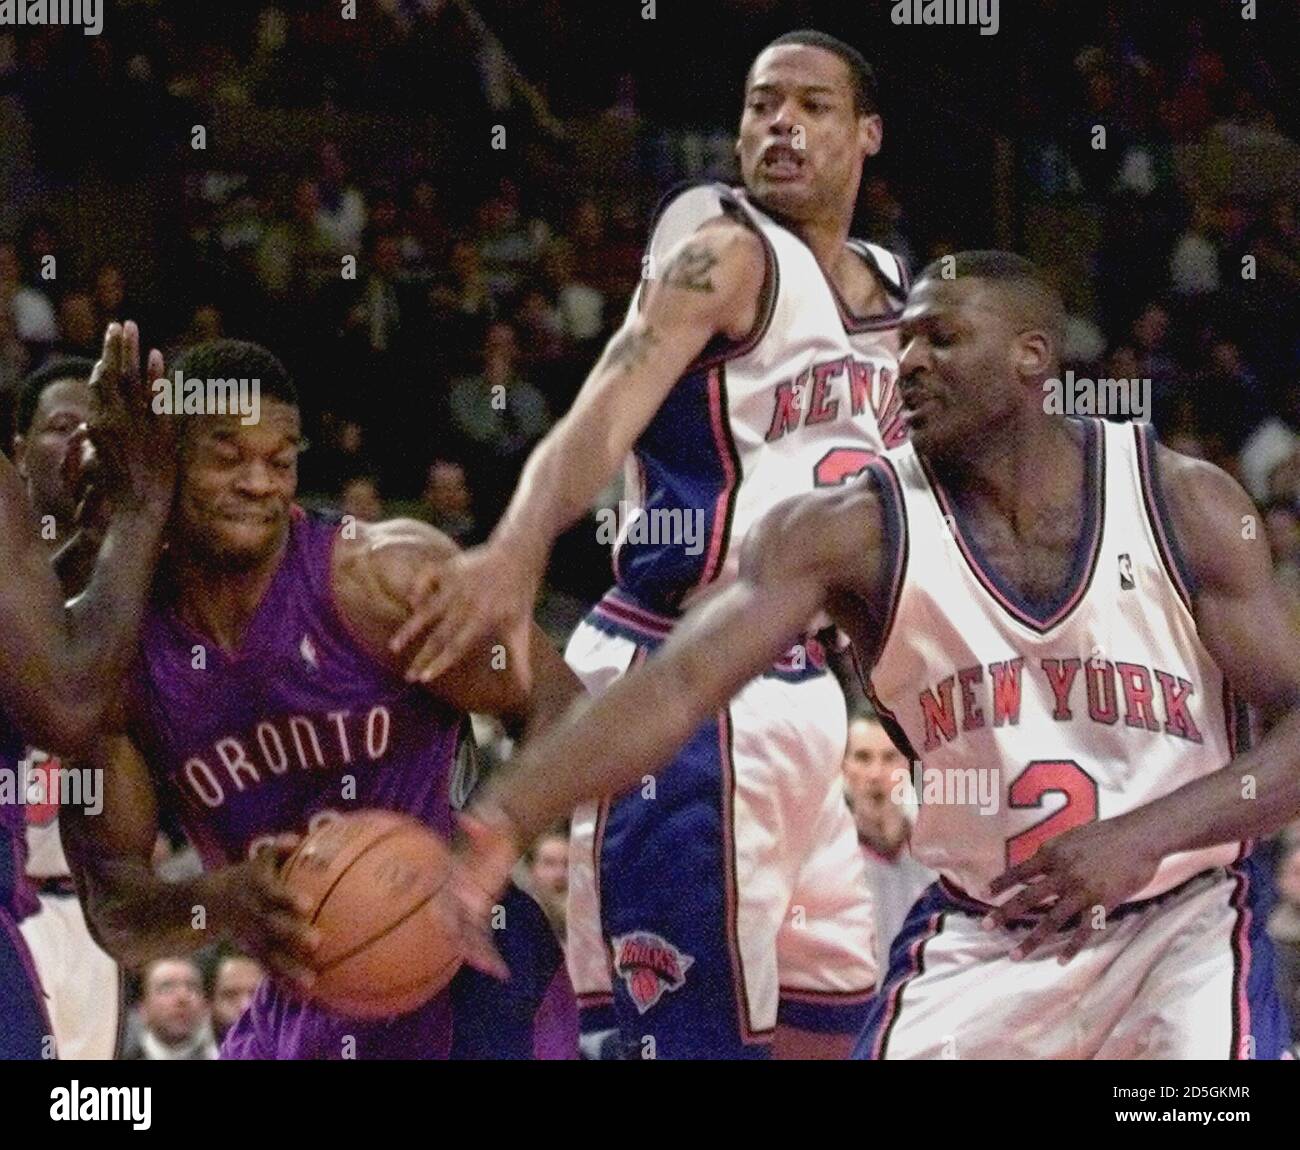 Toronto Raptors forward Charles Oakley (L) grabs the rebound in front of  New York Knicks forwards Marcus Camby (C) and Larry Johnson in the first  period December 22 at New York's Madison